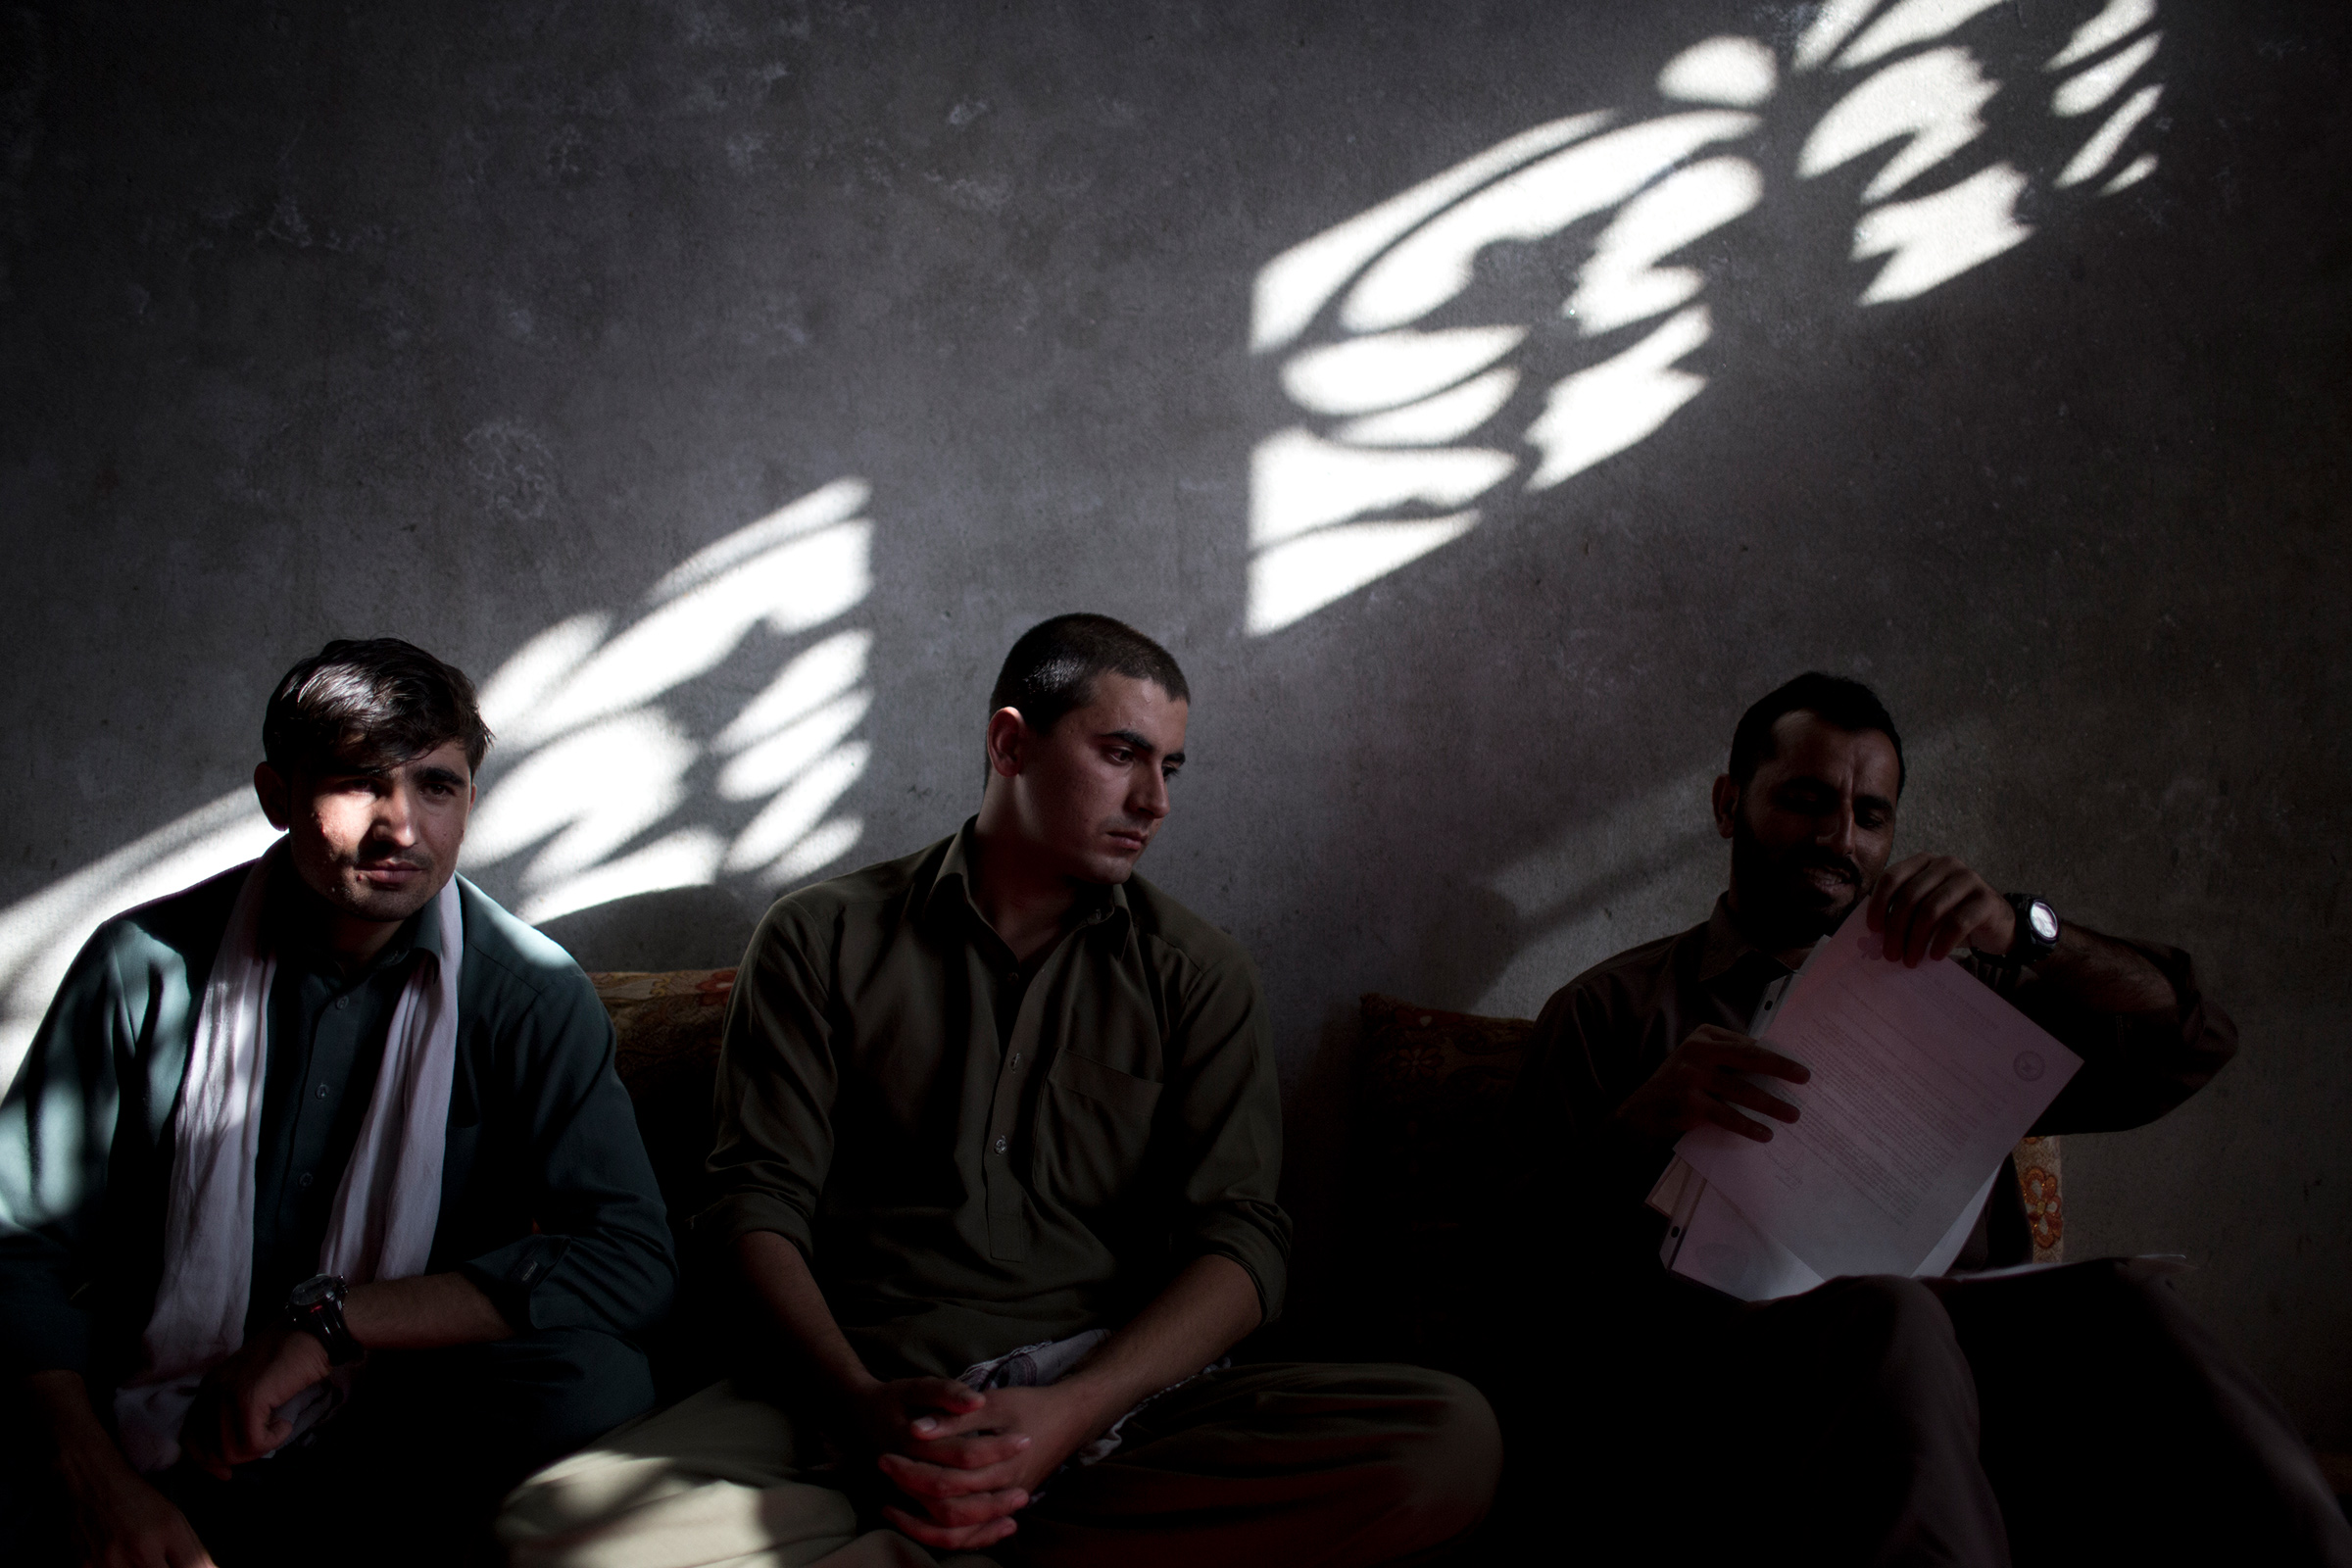 Interpreters, from left, Afiqullah, Irshadullah and Said Hussein, all working for the U.S. army, meet in Jalalabad, Afghanistan, on Oct. 20, 2012. They applied for a U.S. visa through the Afghan SIV program.